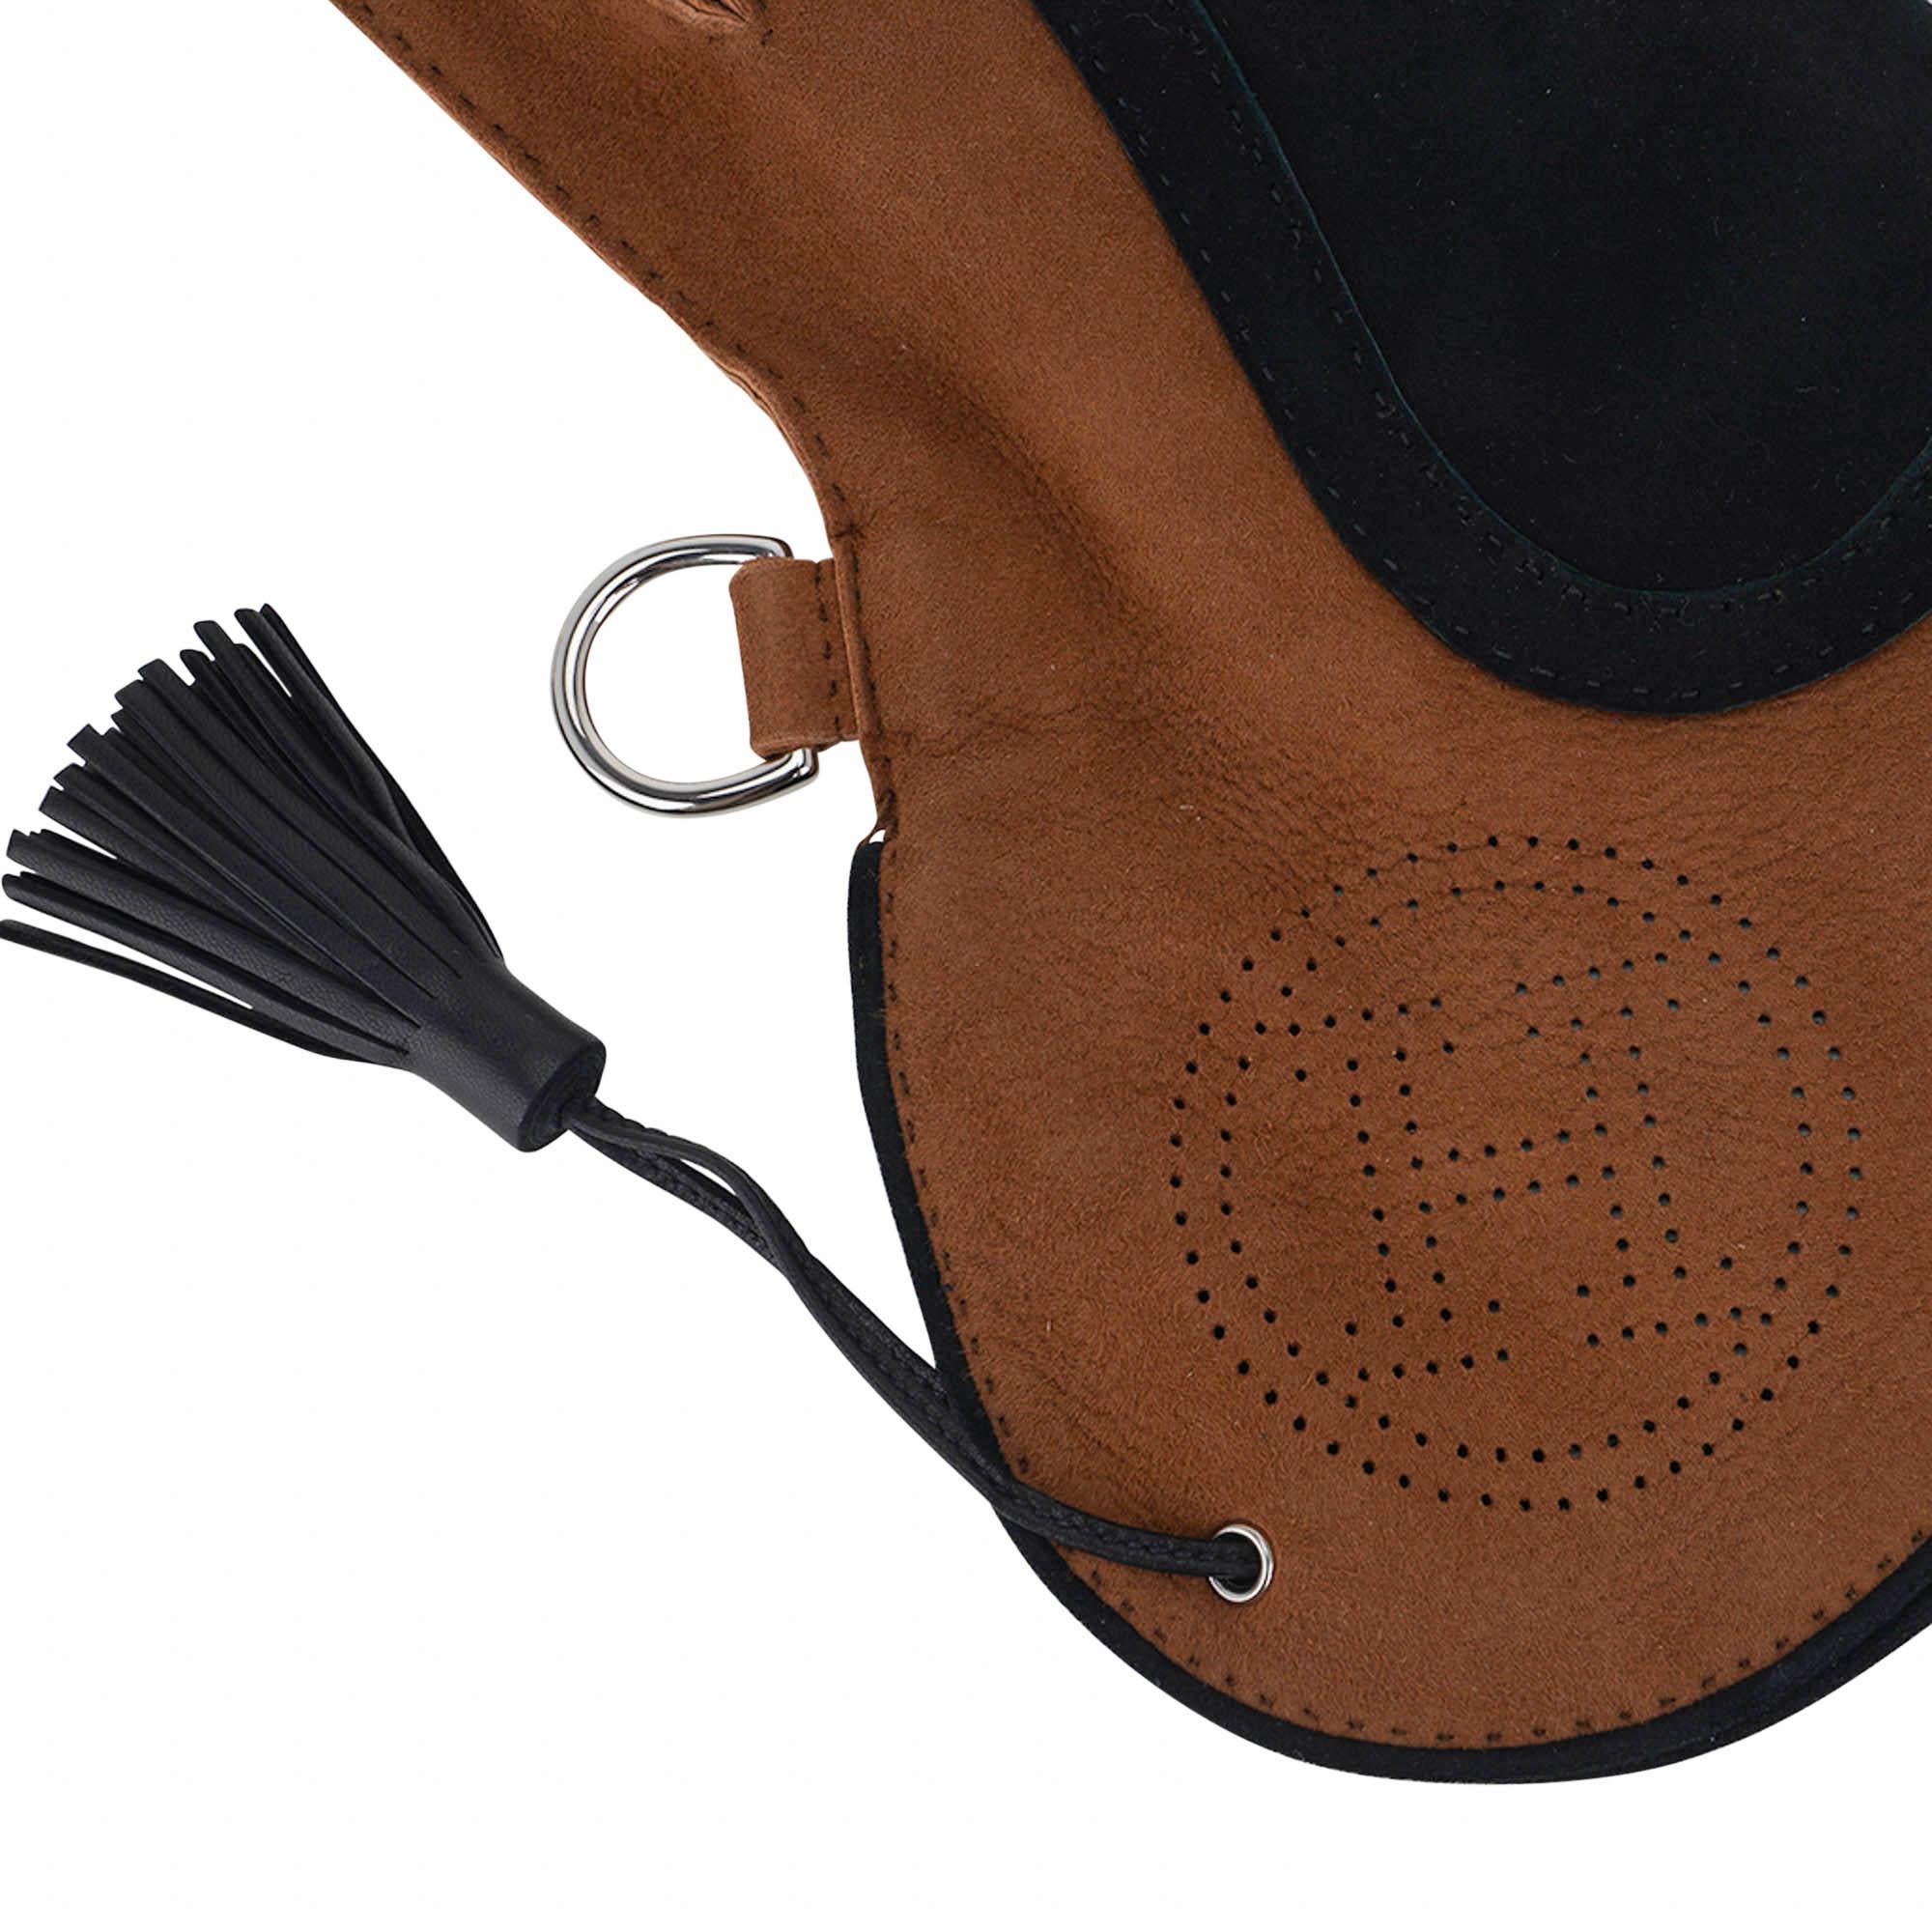 Hermes Falconry Glove Lambskin Left Hand Size 9 In New Condition For Sale In Miami, FL